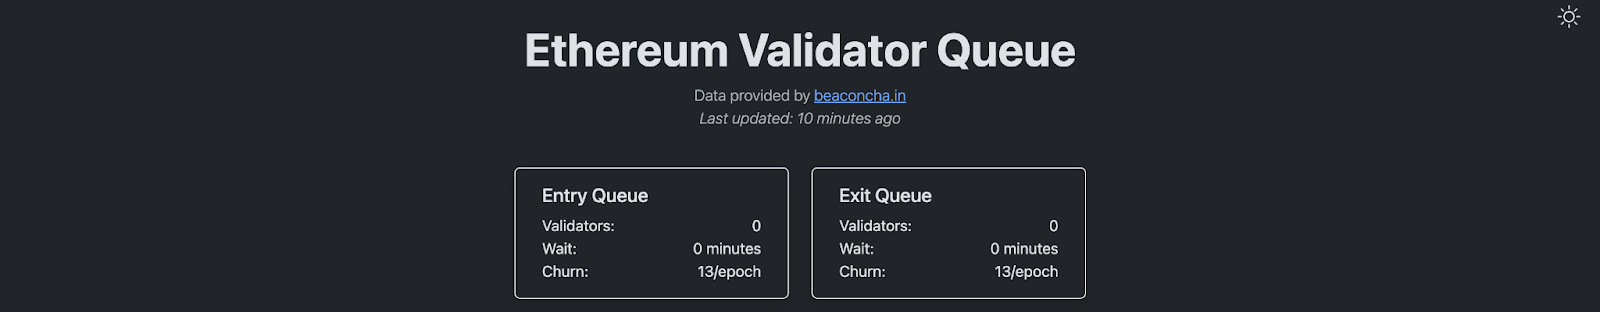 Ethereum Validator Queues for Entry and Exit Positions Drop to New Record Lows: Report